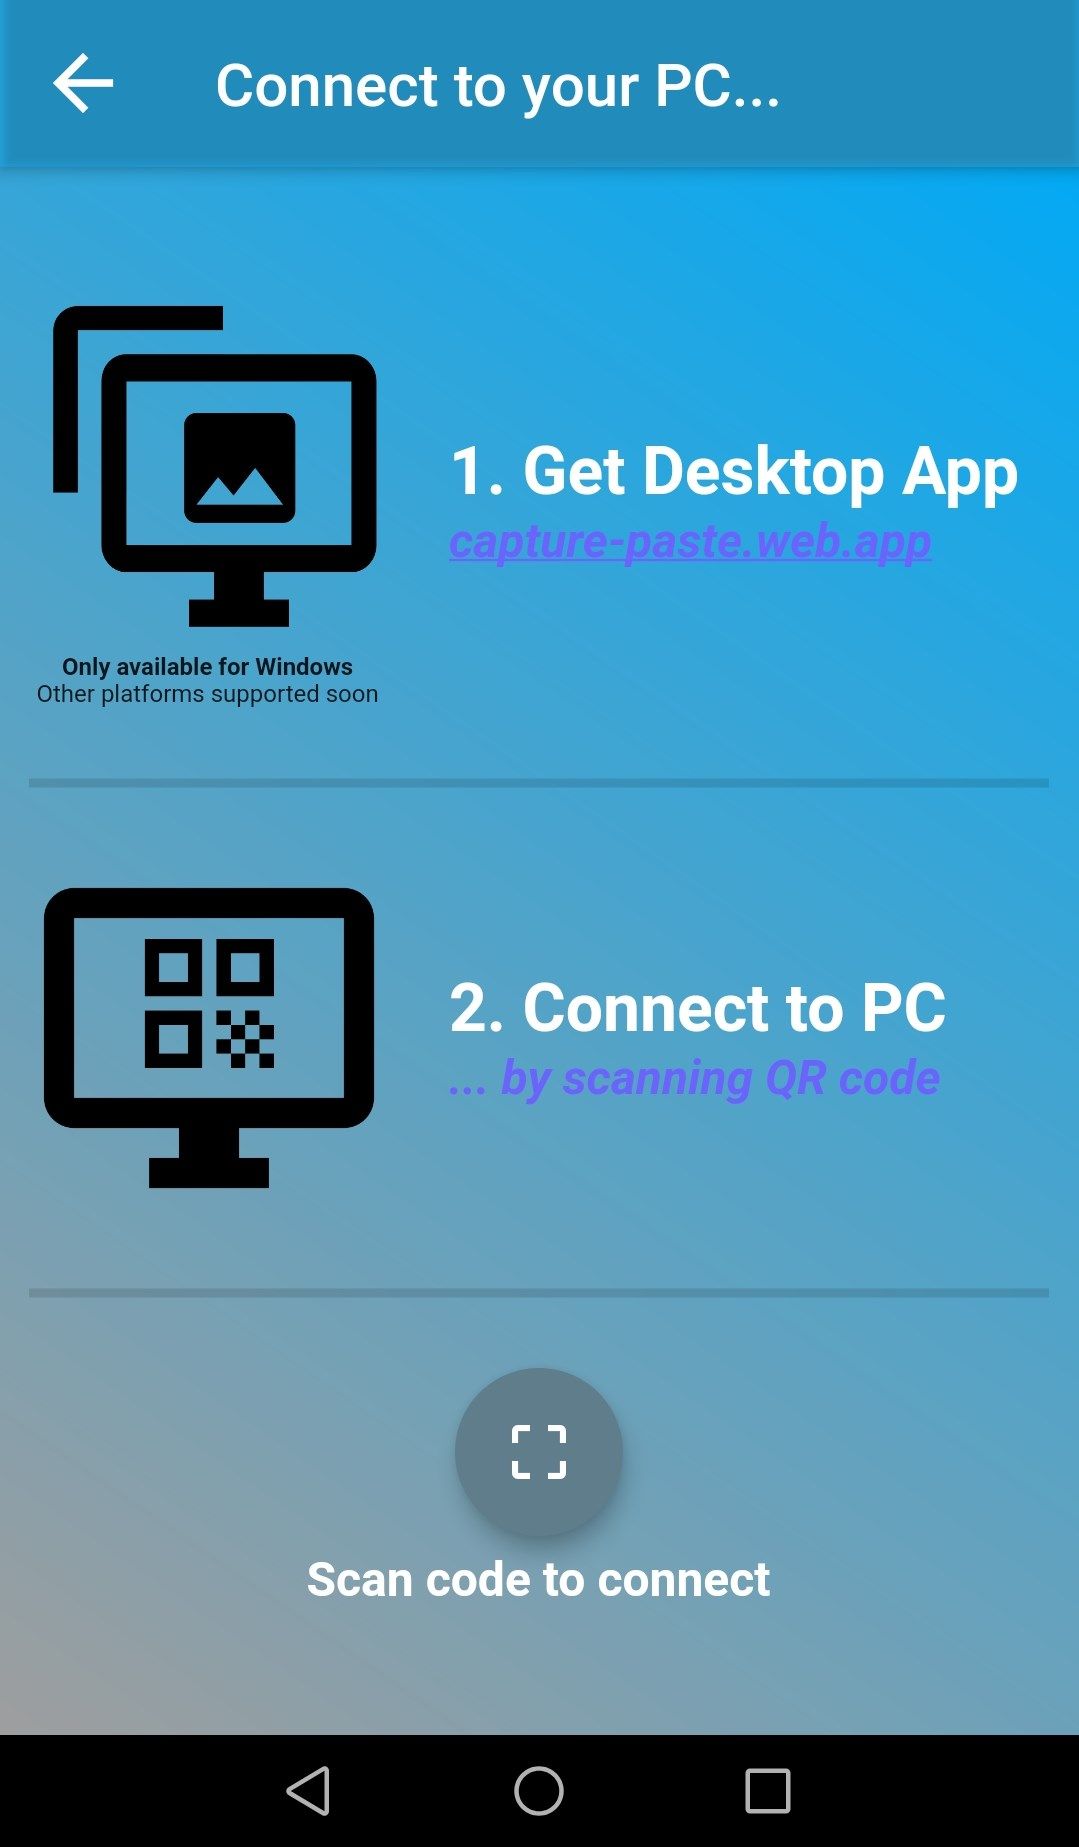 Scan the QR code with the Android app to connect your phone with your computer.